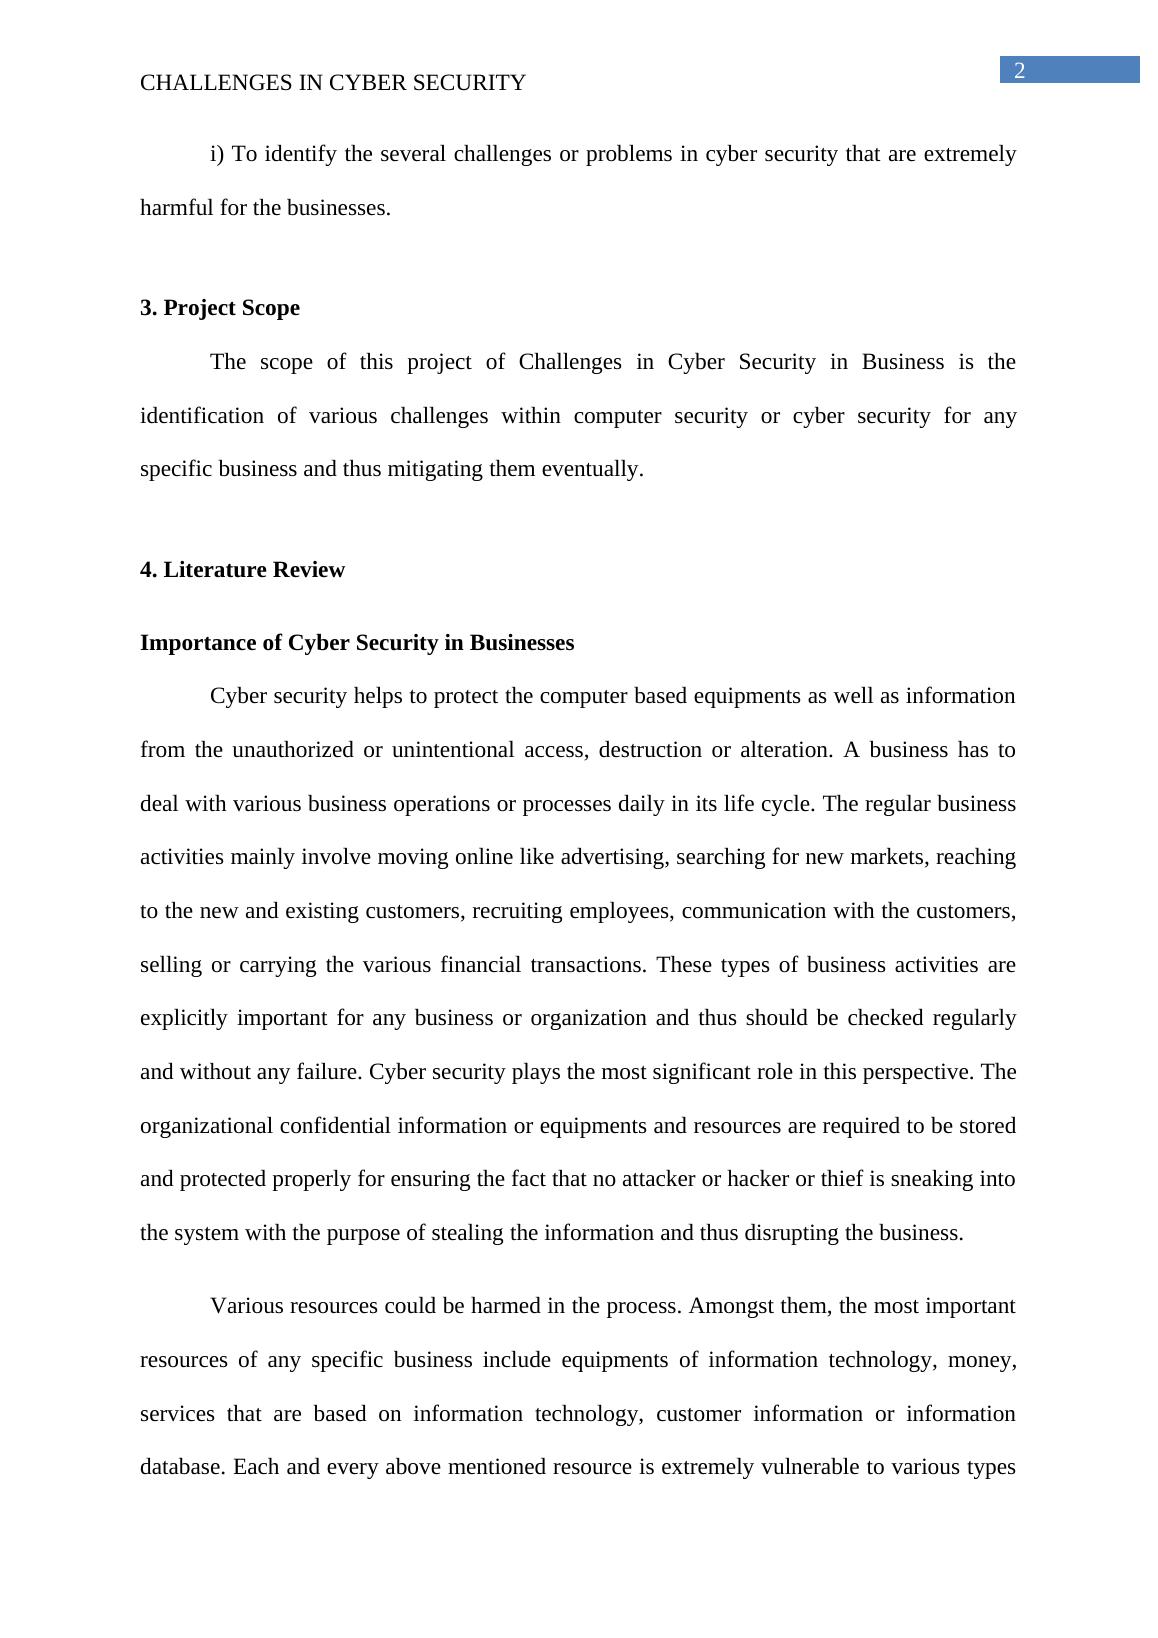 Challenges in Cyber Secuirty (pdf)_3